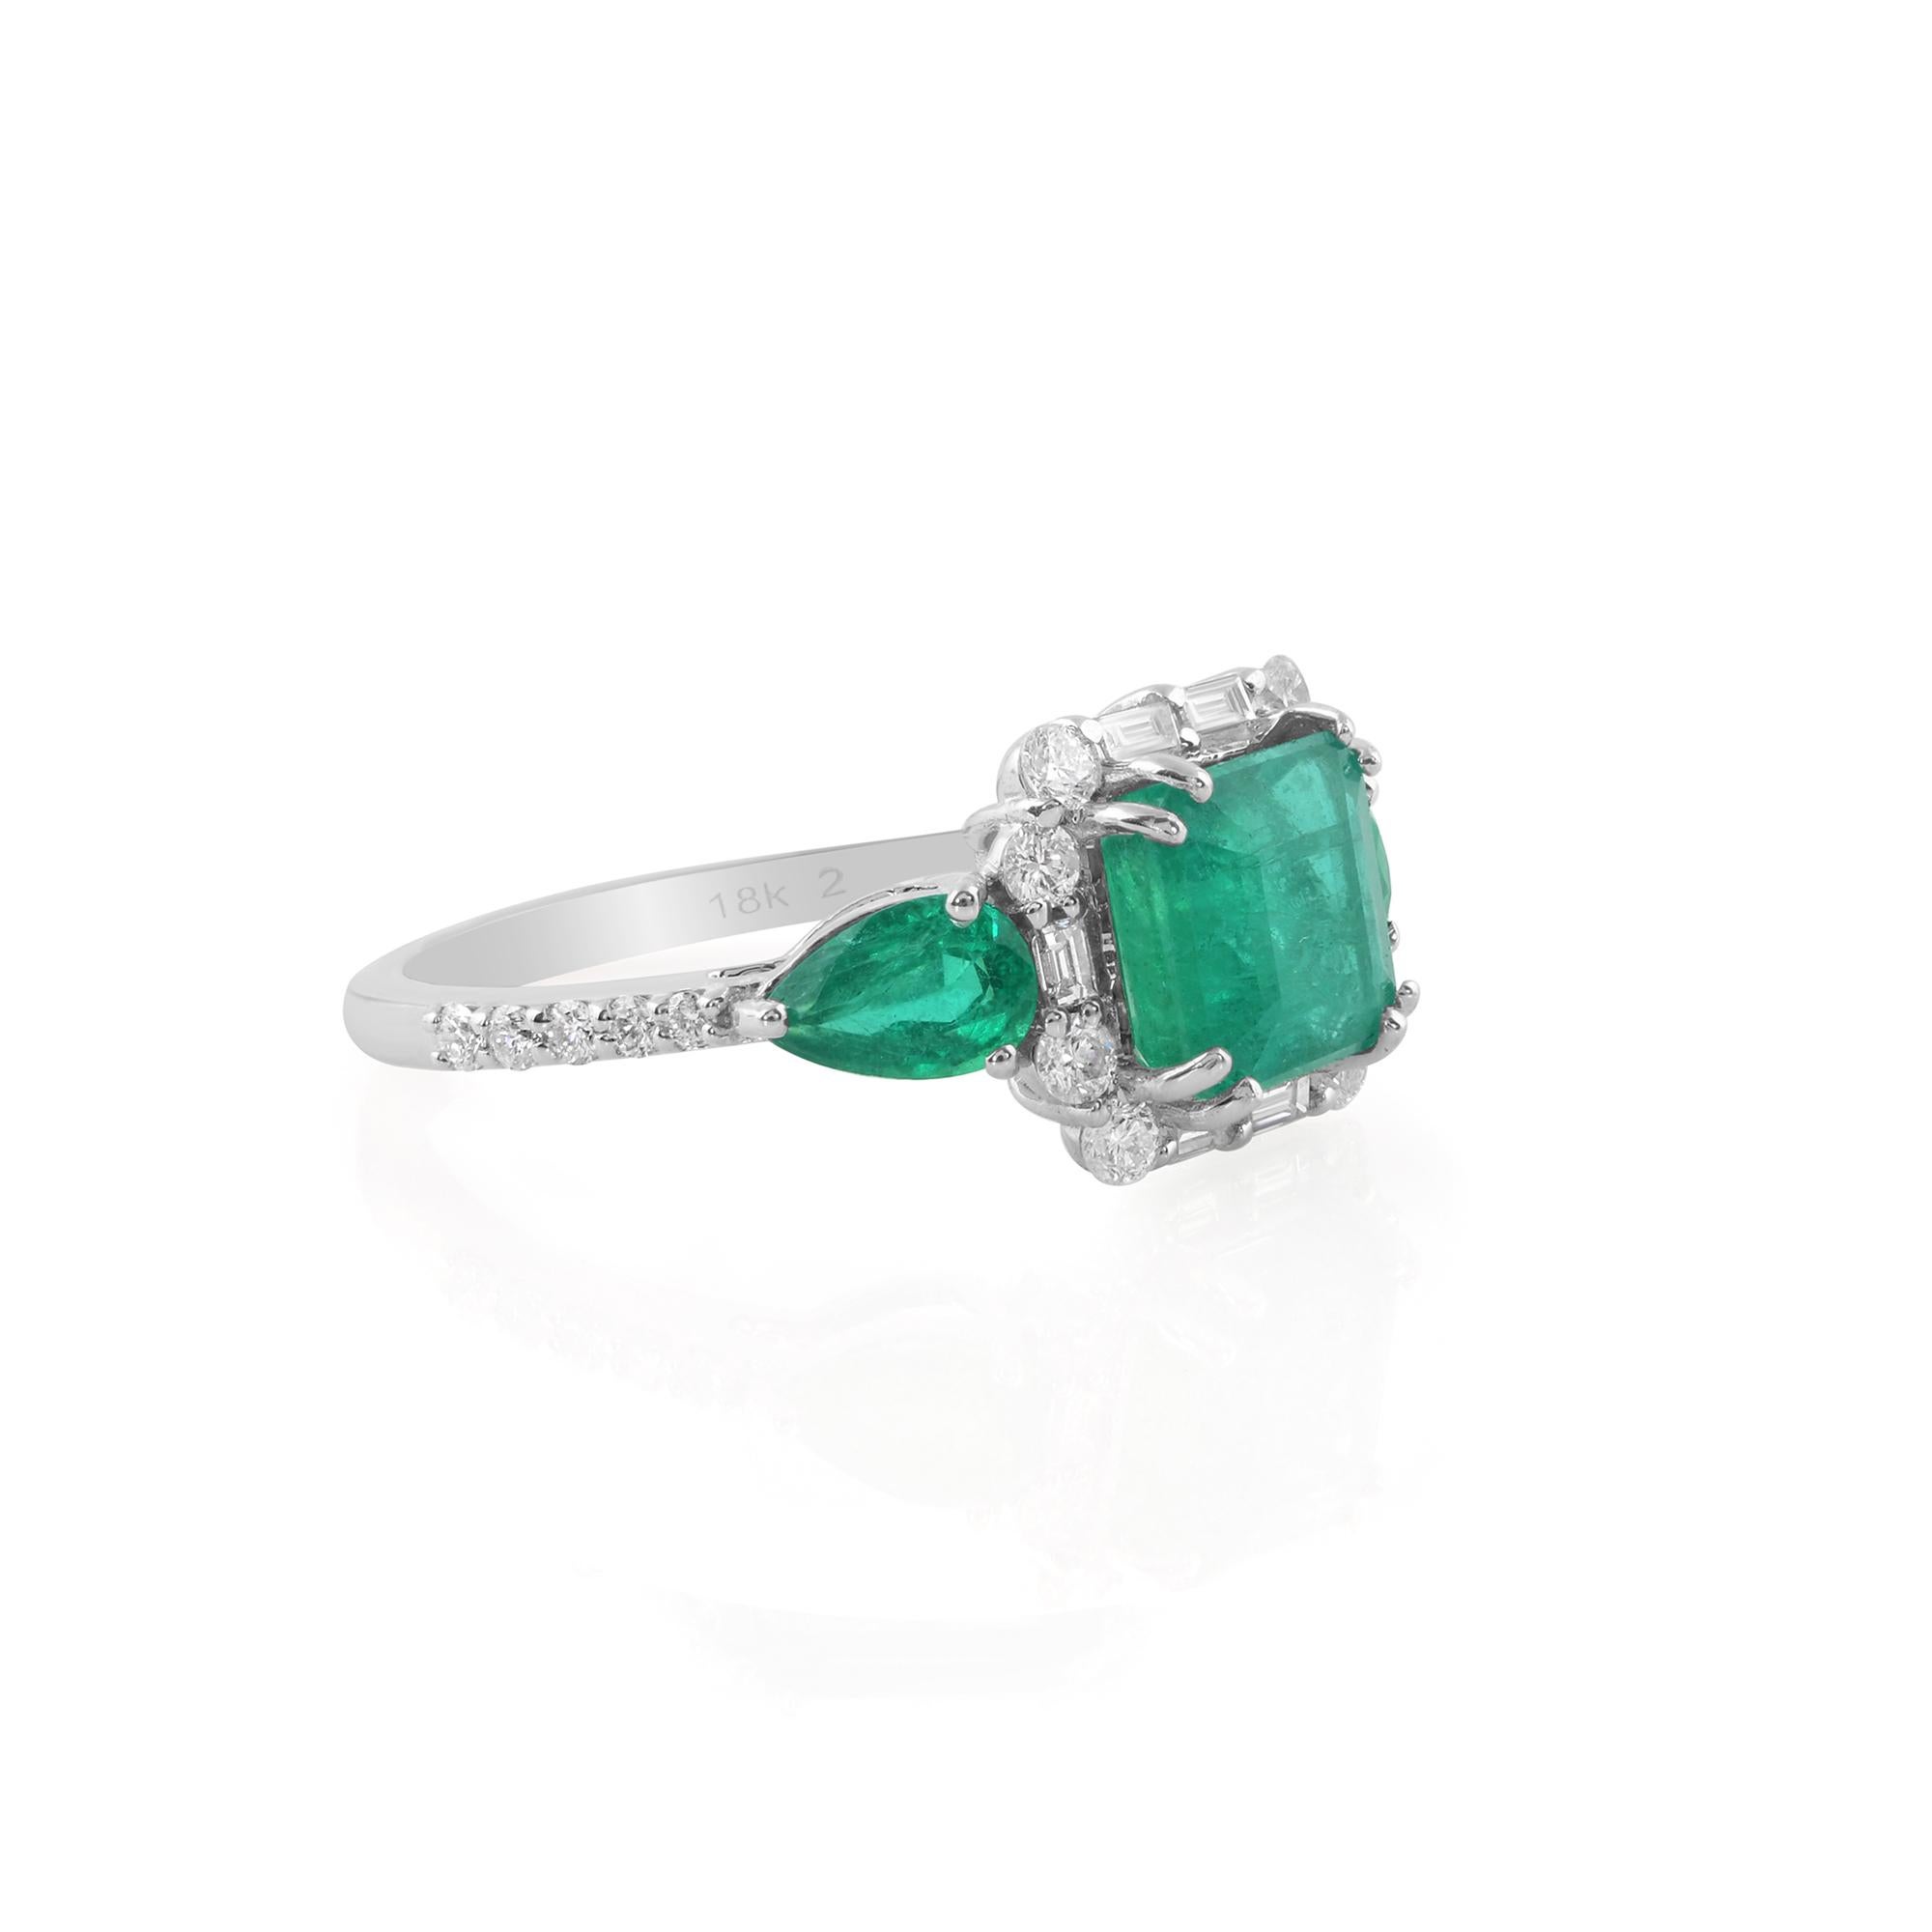 At the heart of this masterpiece lies a captivating Zambian Emerald, sourced from the renowned mines of Zambia, renowned for producing emeralds of exceptional quality and unparalleled brilliance. The lush green hue of the emerald exudes a sense of